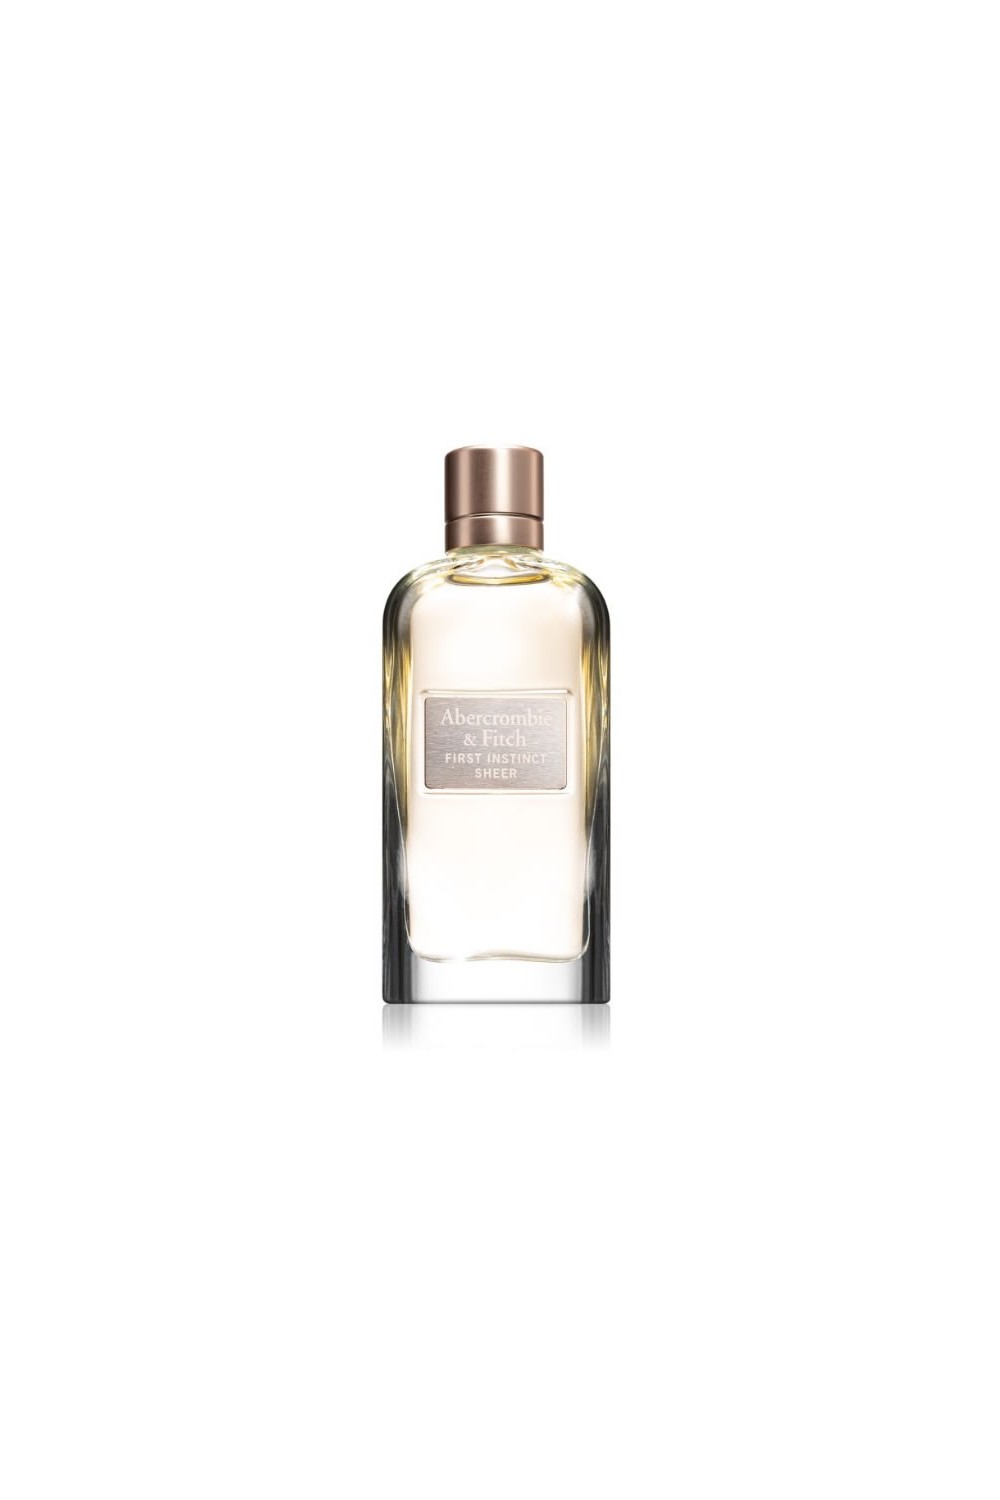 ABERCROMBIE & FITCH - Abercrombie And Fitch First Instinct Sheer Eau De Perfume Spray 100ml